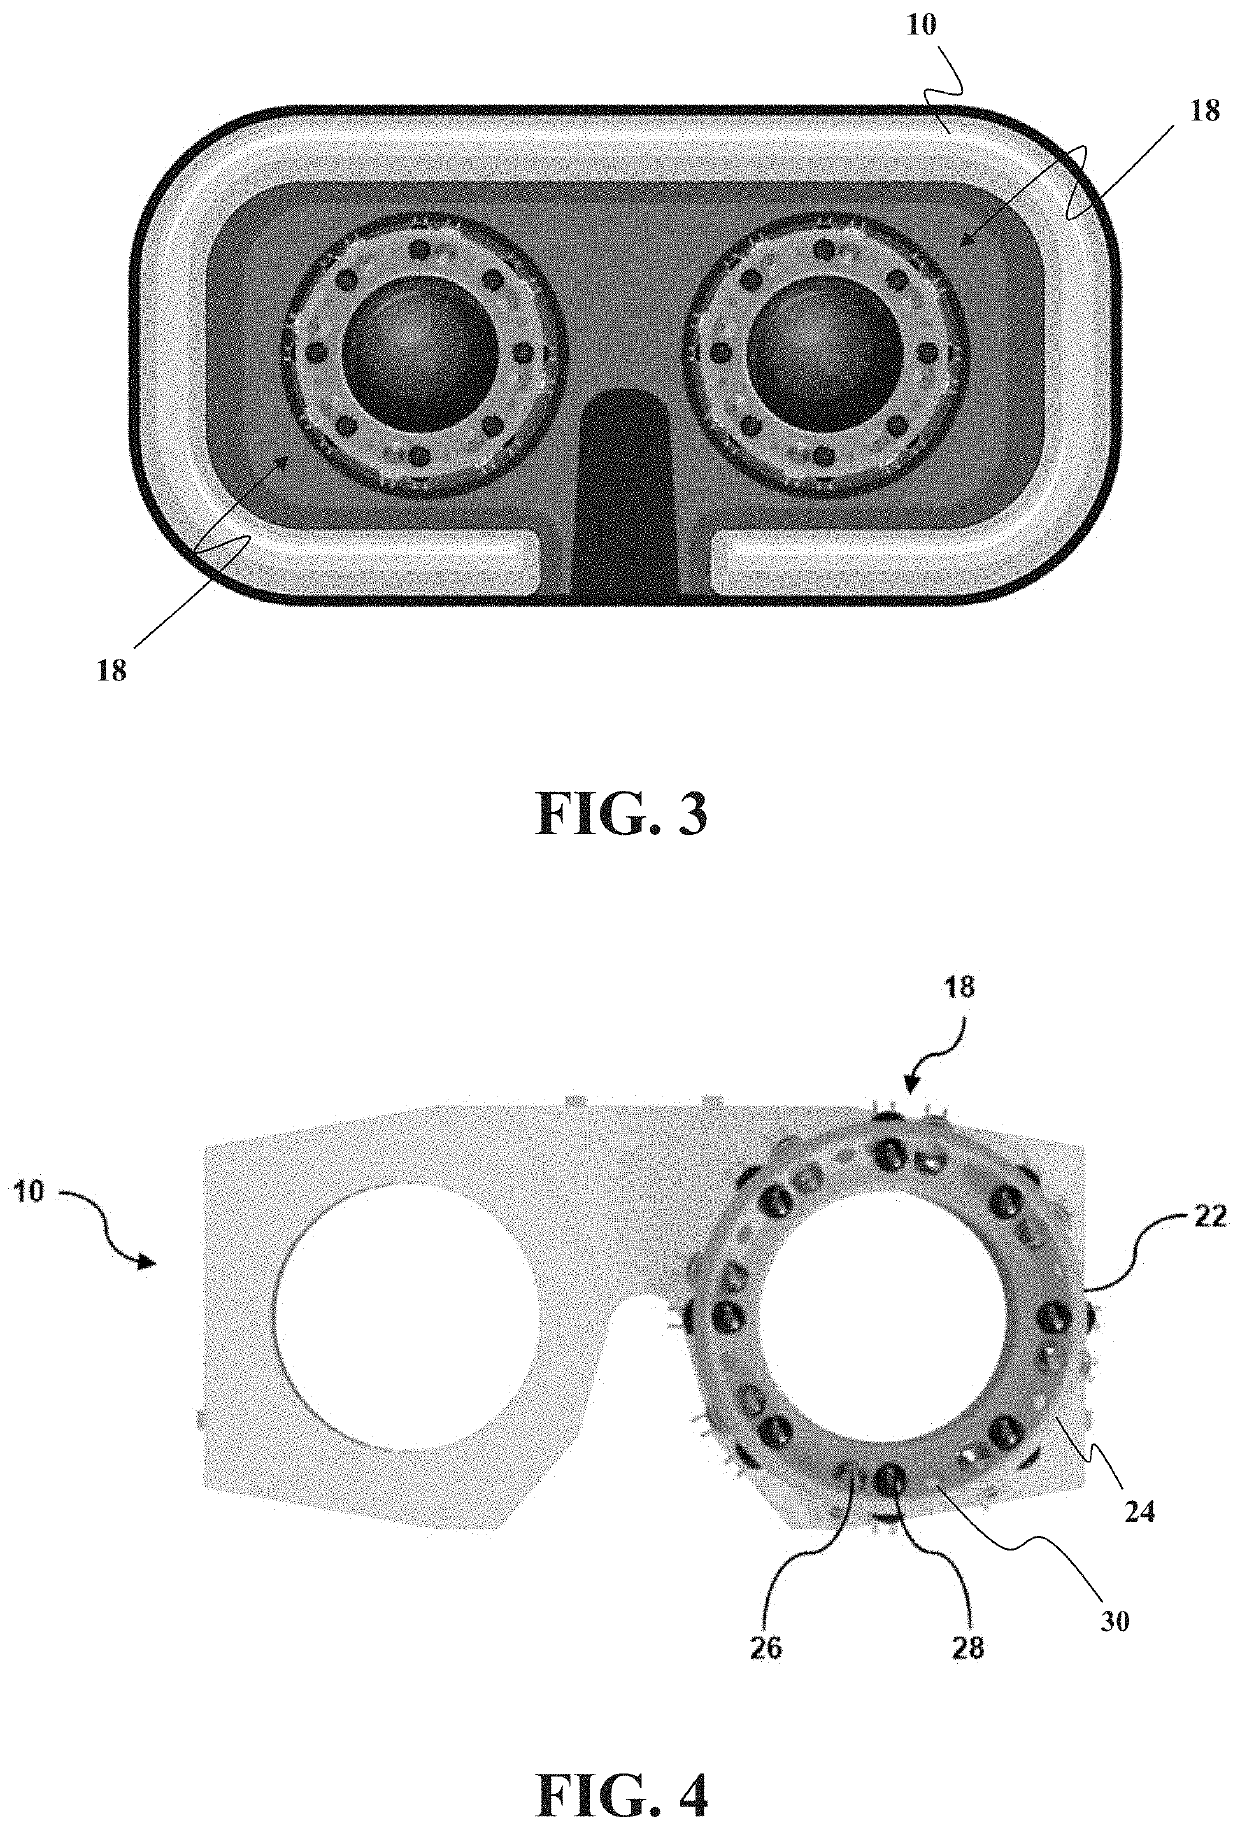 Eye tracking system for use in head-mounted display units